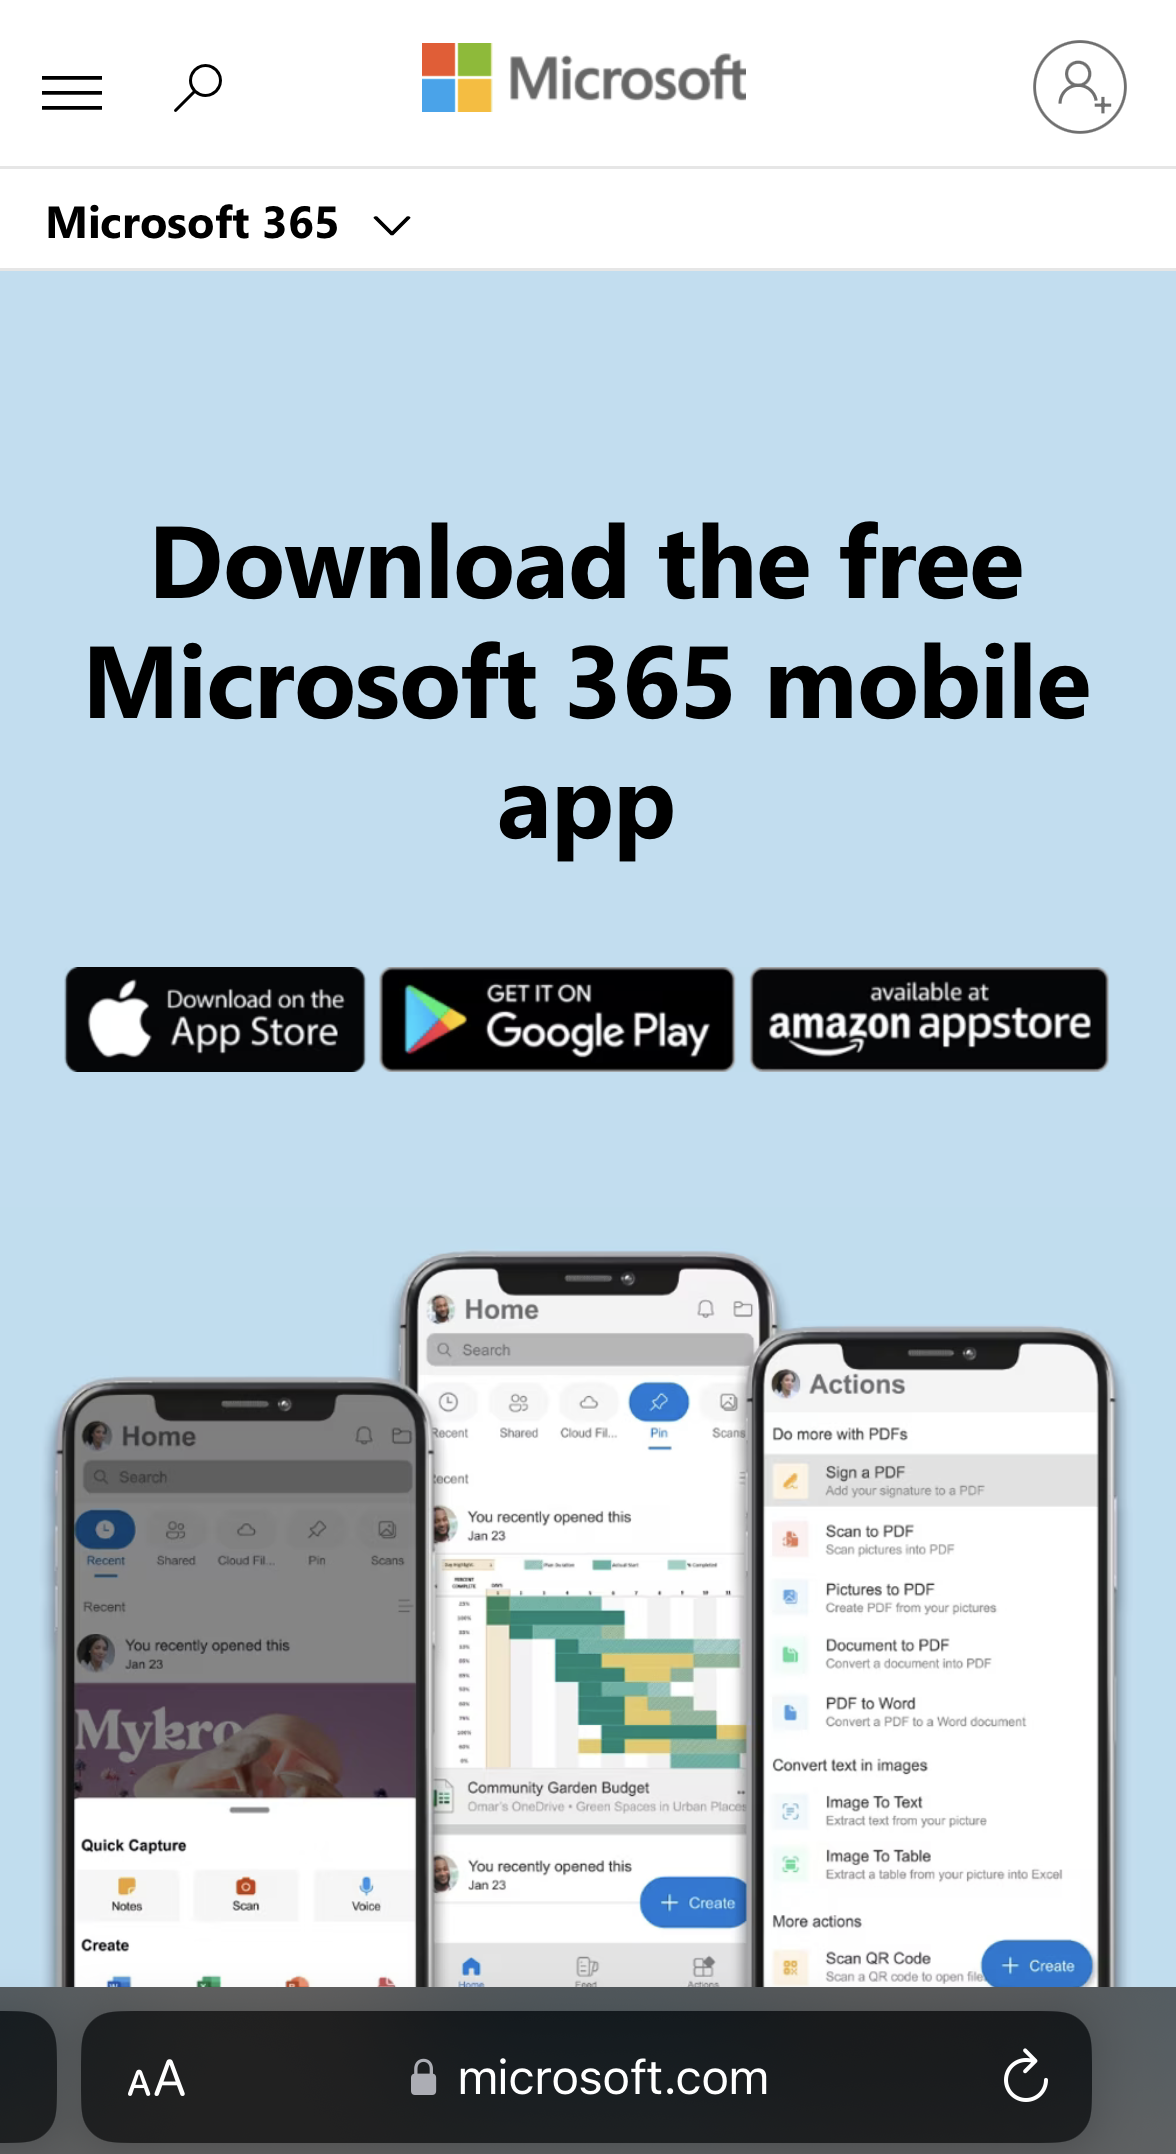 Download the free Microsoft 365 mobile app